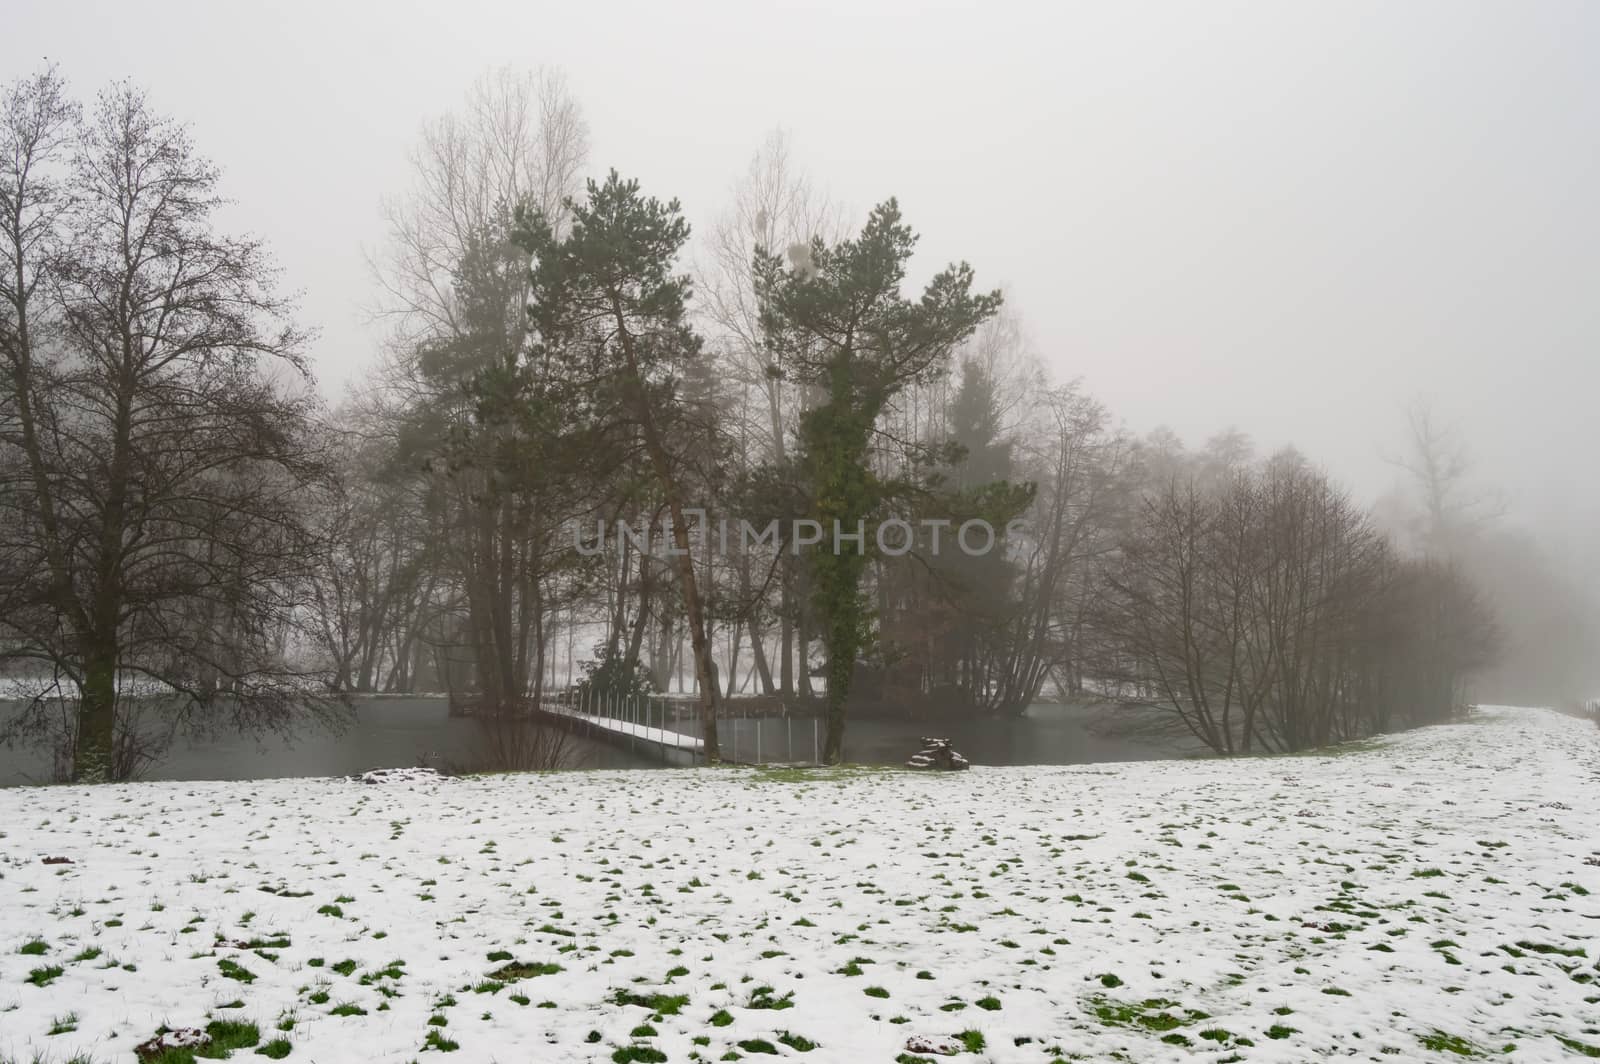 Small pond under the snow and mist in the province of Luxembourg in Belgium